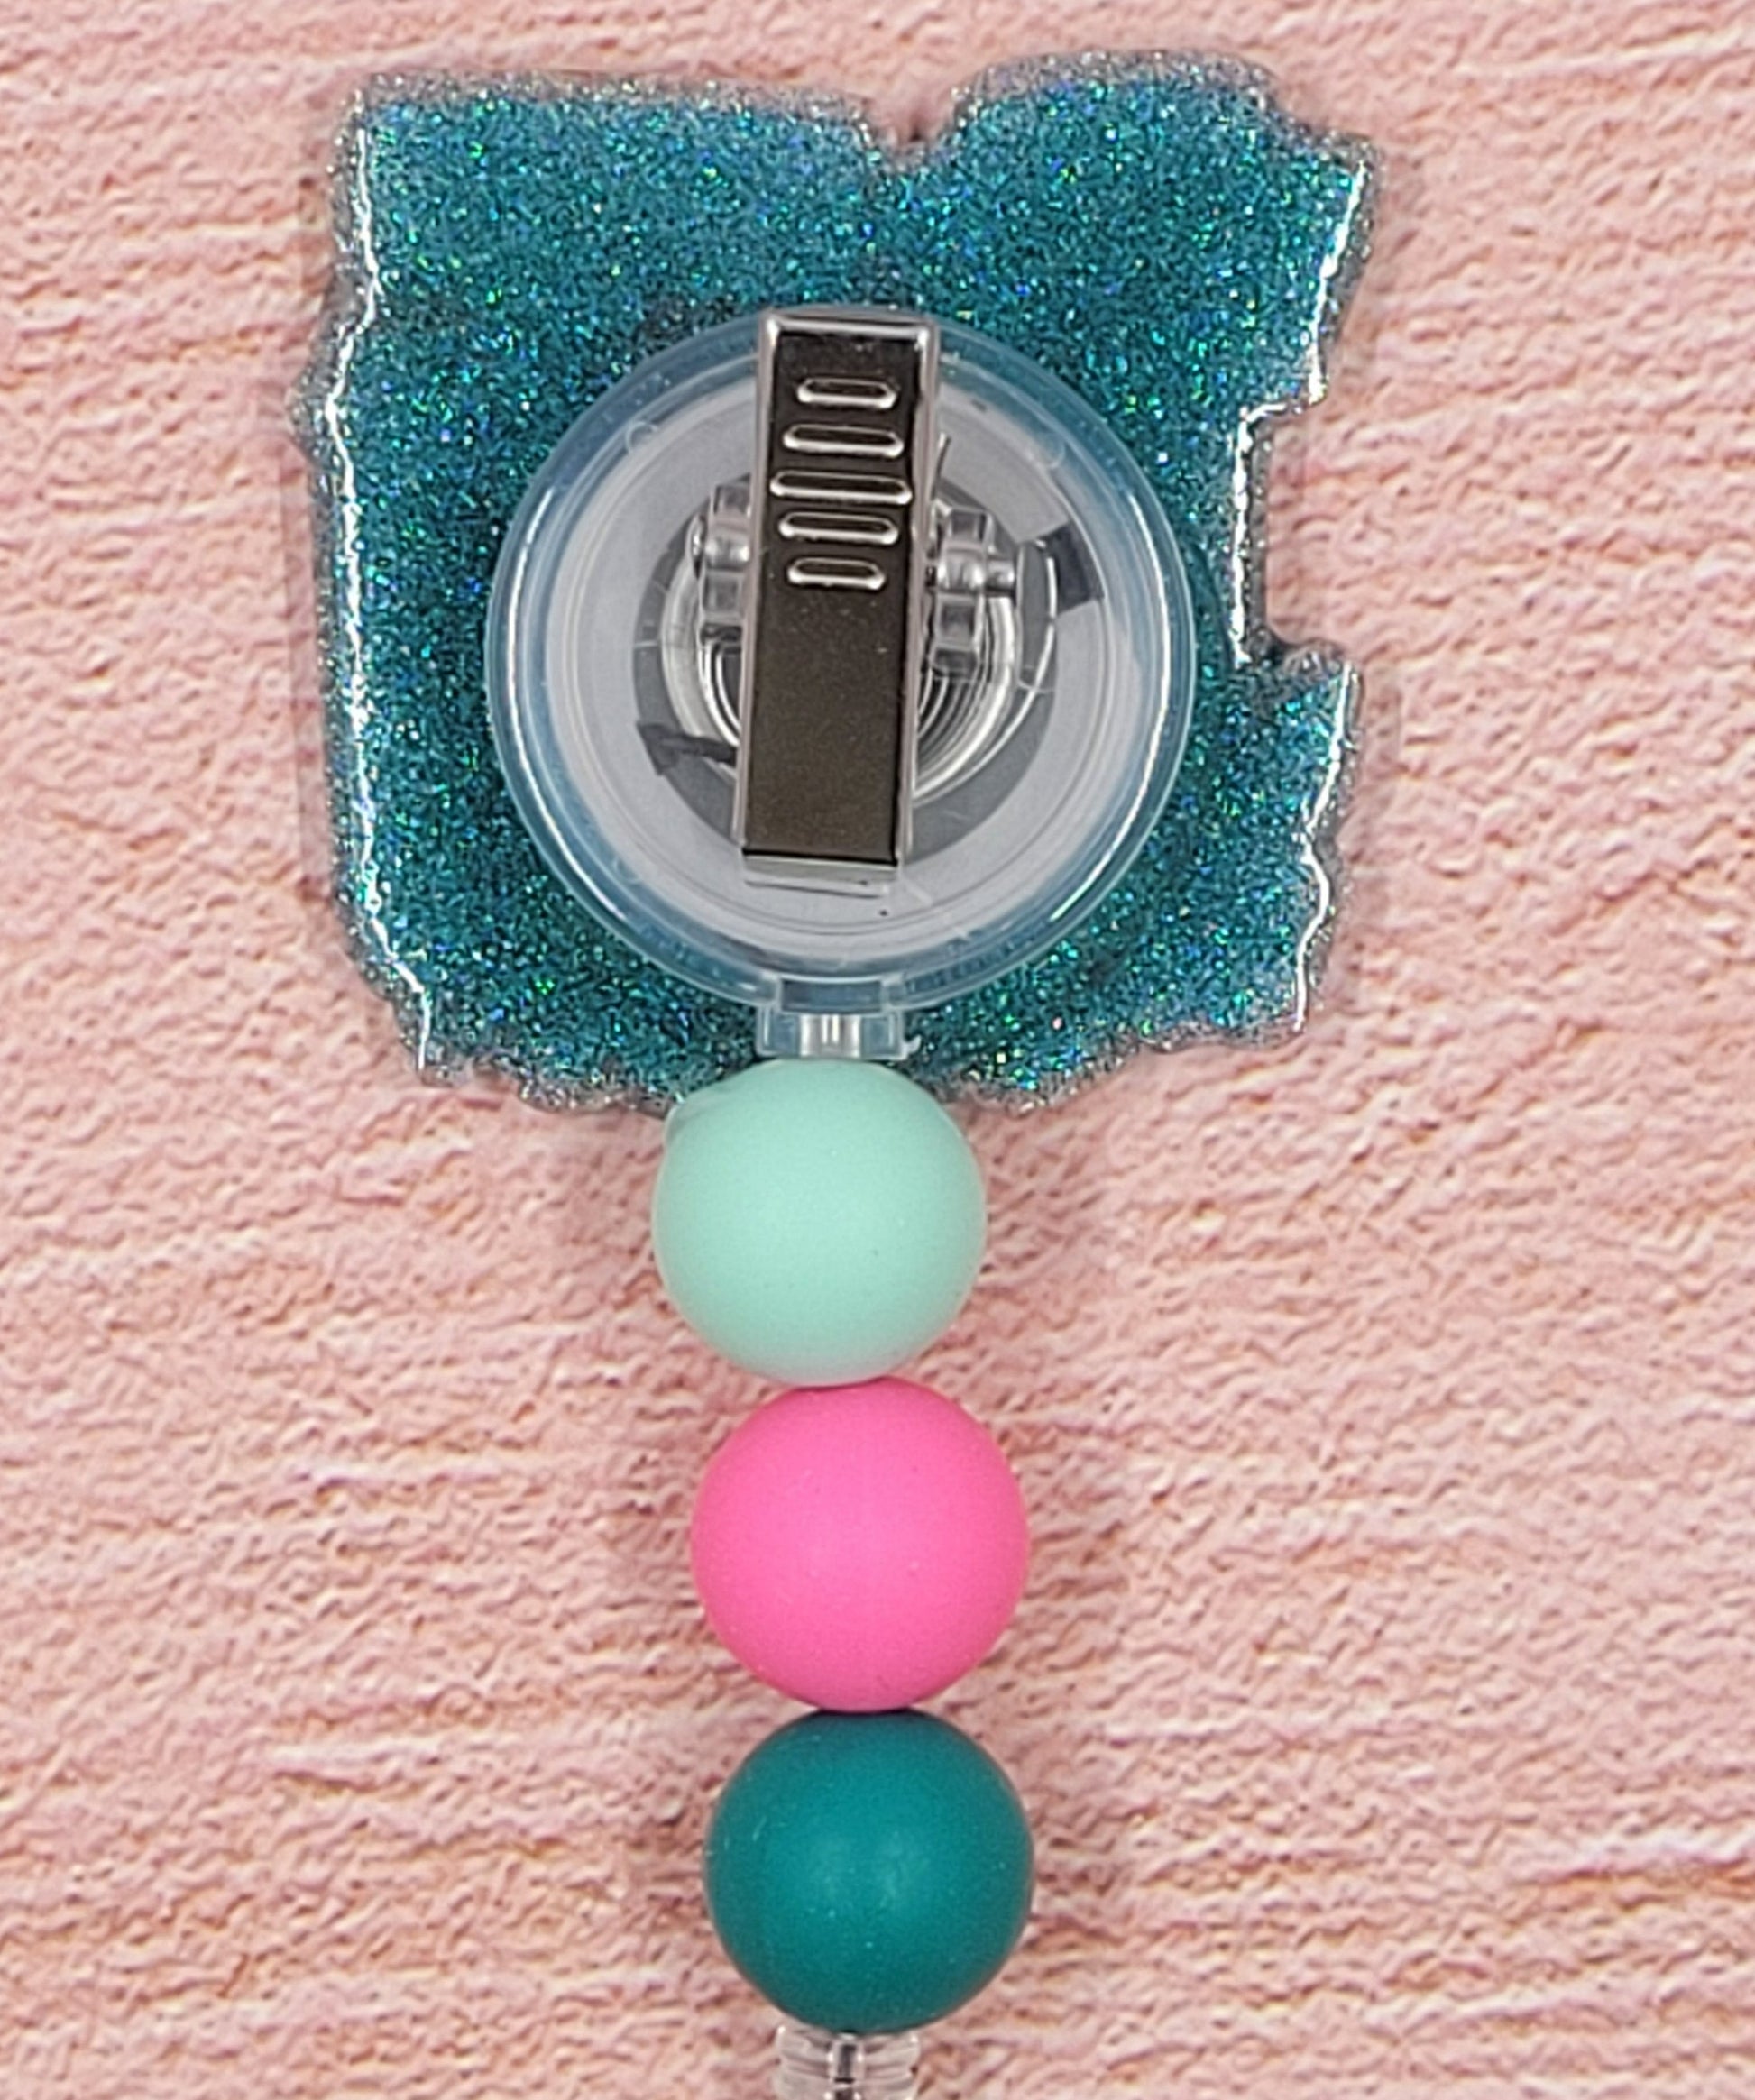 Introducing the new RN Badge Reel, part of our latest collection of Medical Badge Reels available now. Featuring a blue glitter base adorned with coordinating beads in shades of pink and blue, this Badge Reel is sure to catch the eye.